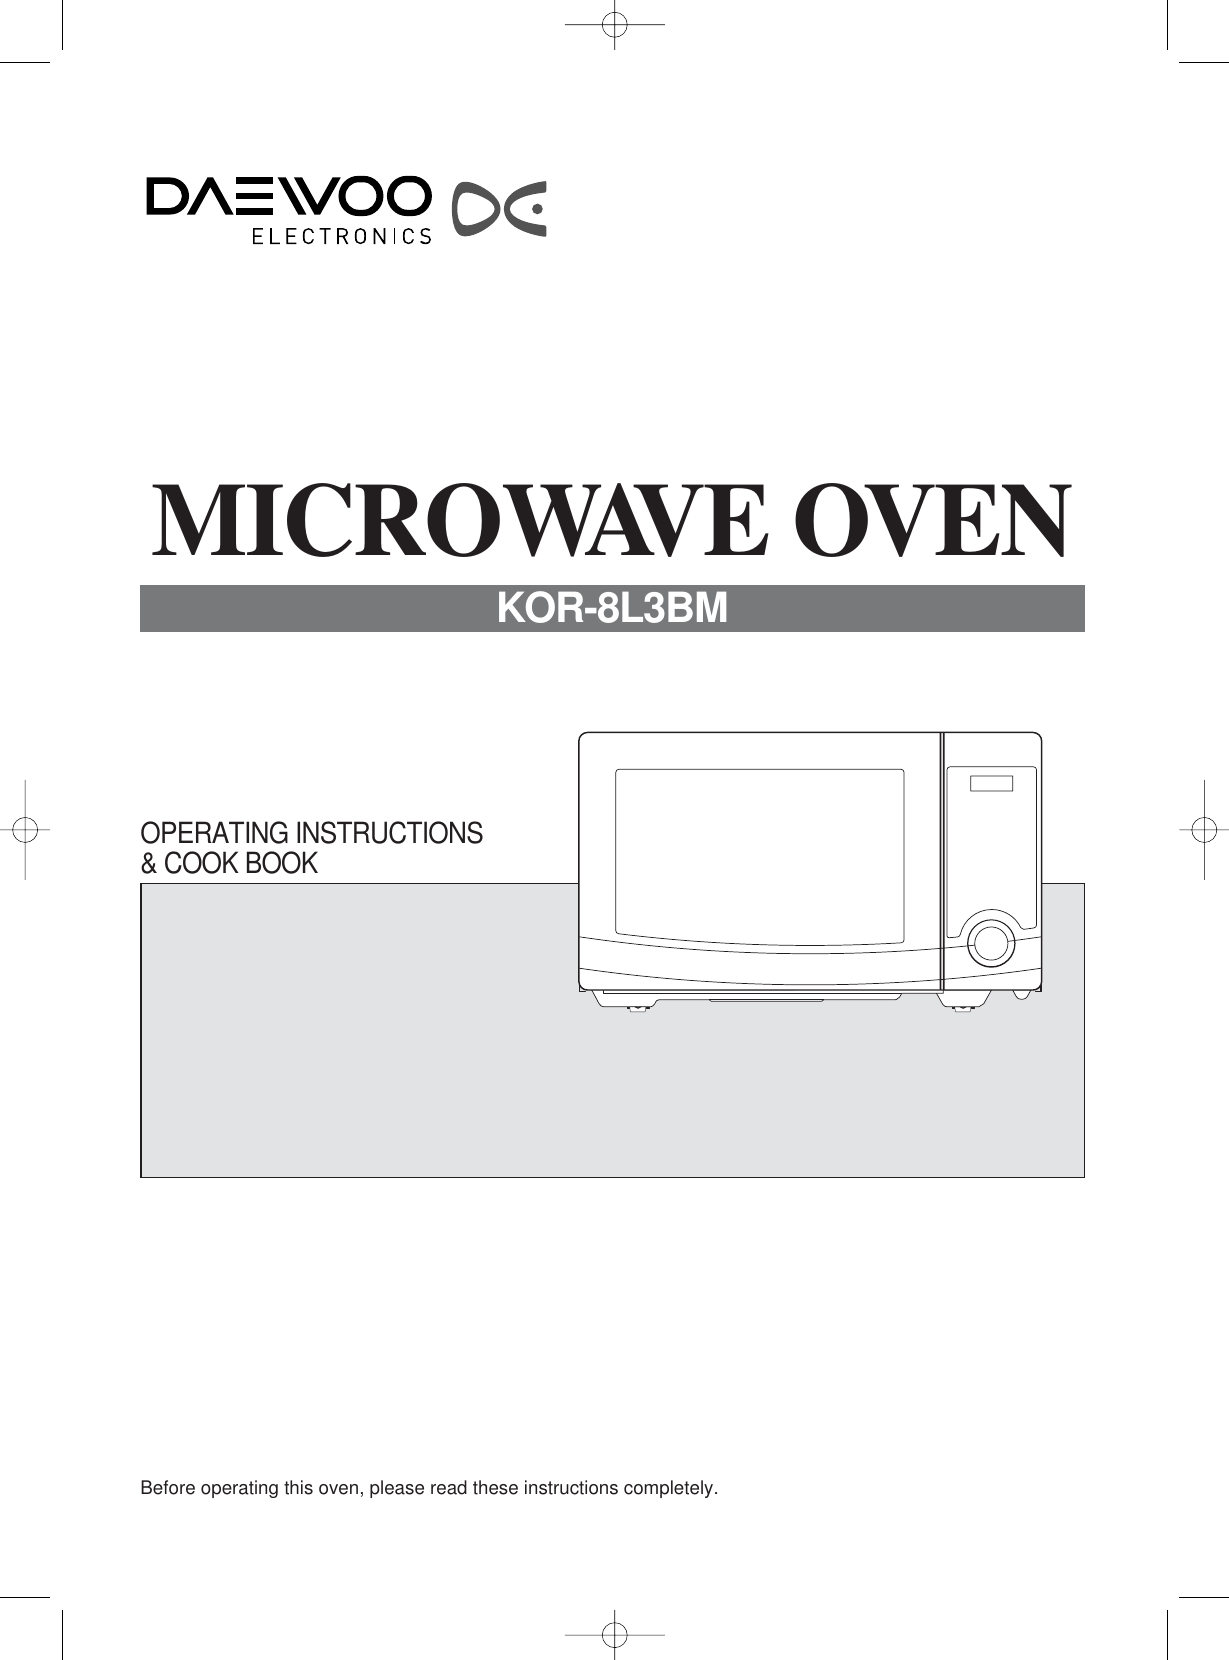 Before operating this oven, please read these instructions completely.OPERATING INSTRUCTIONS&amp; COOK BOOKMICROWAVE OVENKOR-8L3BM